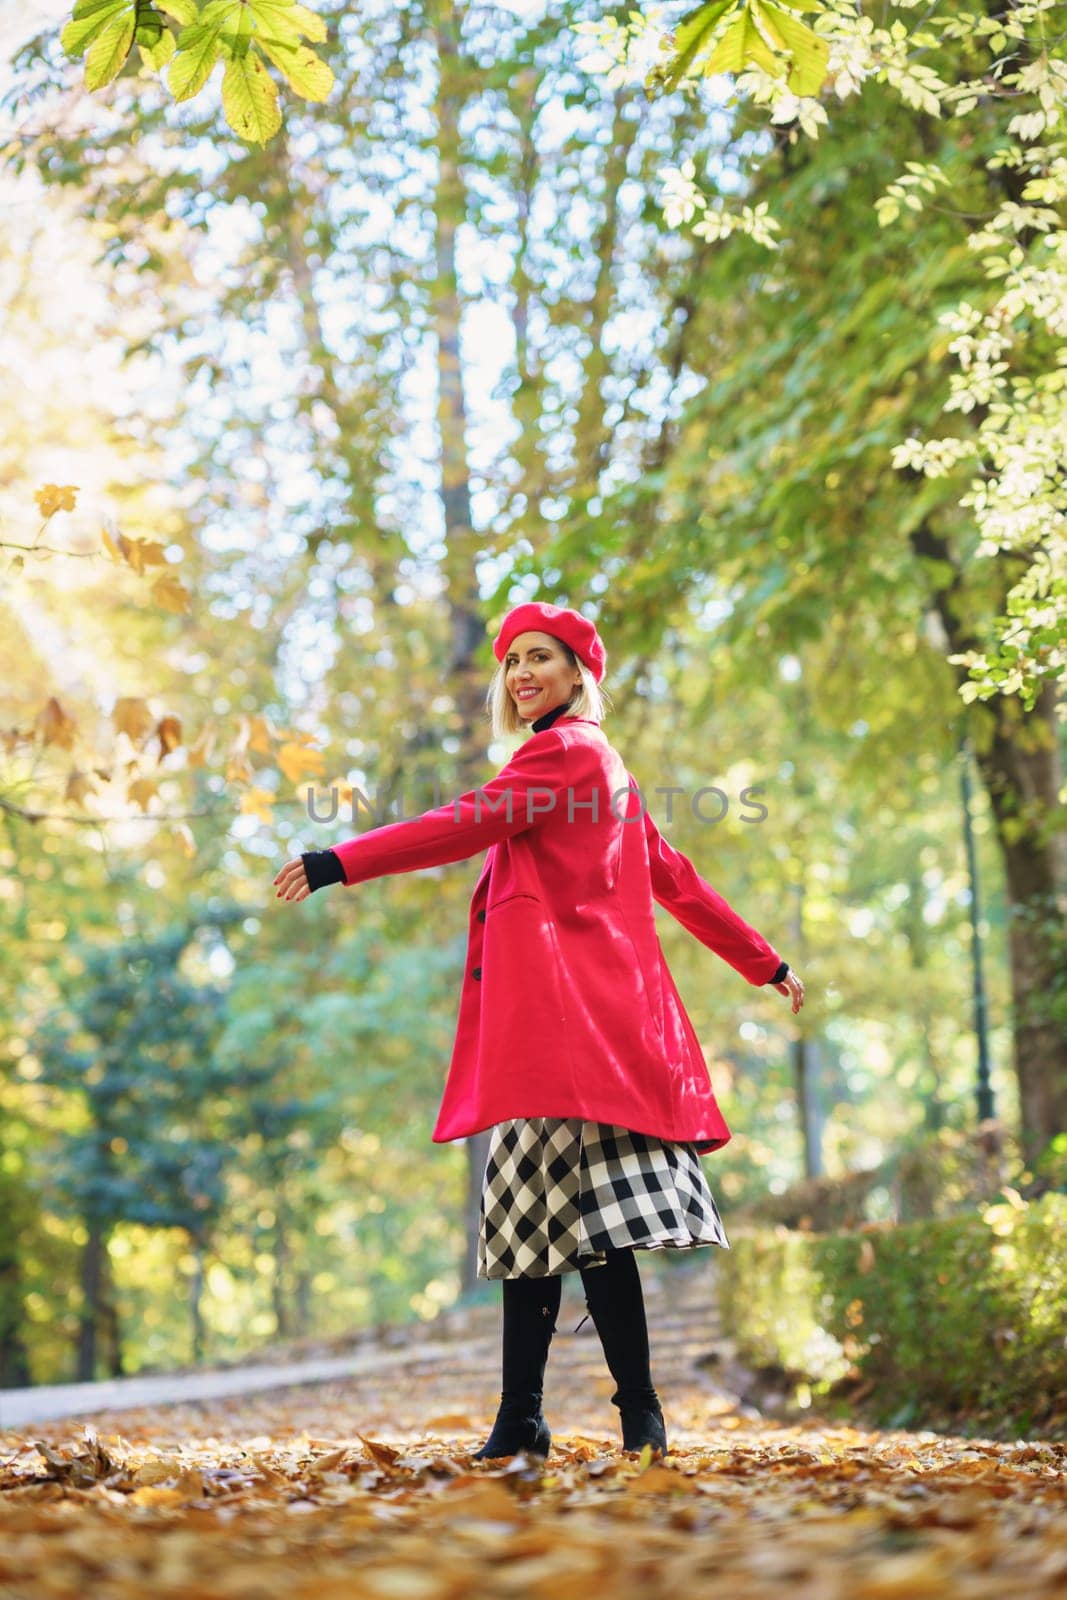 Full body side view of positive female in red clothes spinning around while standing on alley with dried leaves in autumn park